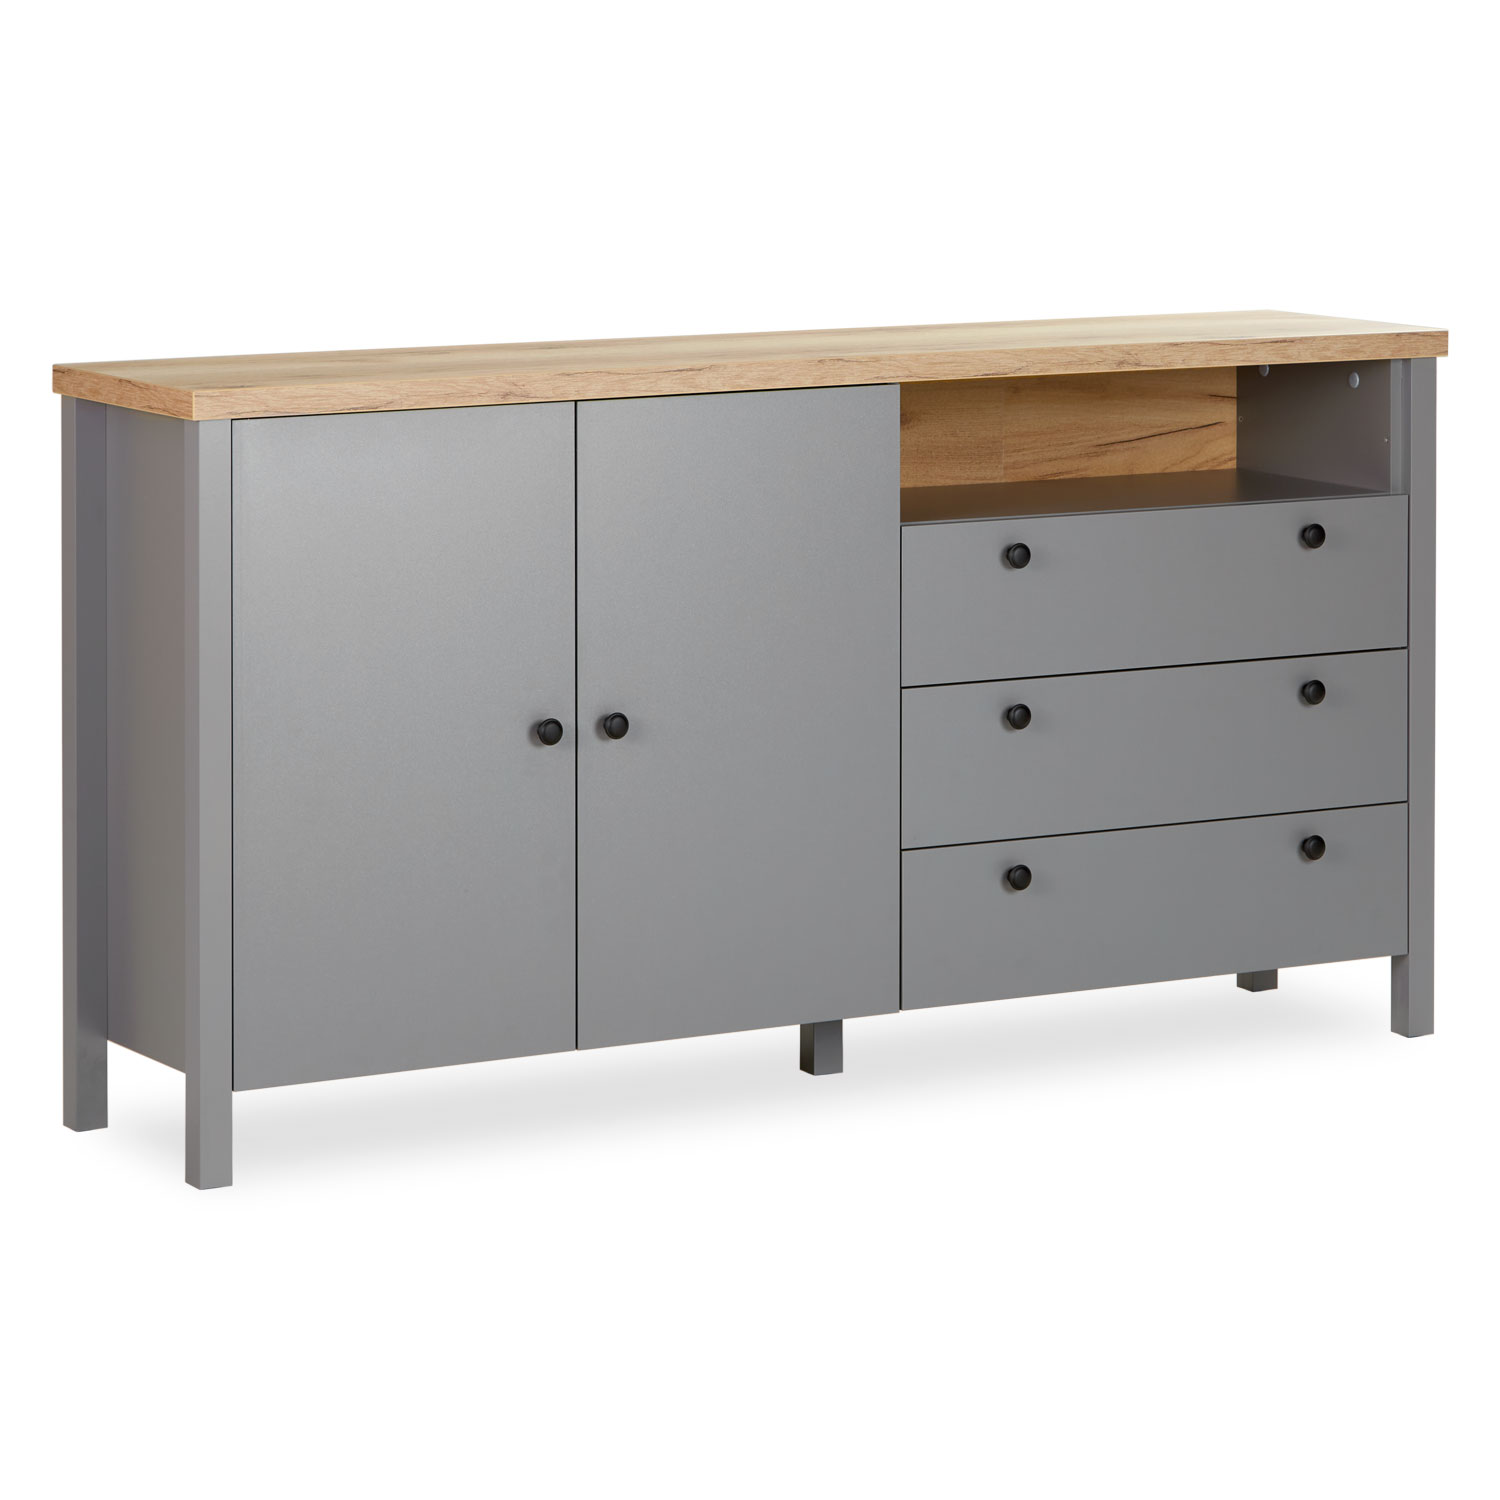 Chest of Drawers Sideboard Grey 166.5 cm Wood Solid Cupboard with 3 Drawers Highboard Living Room Cabinet